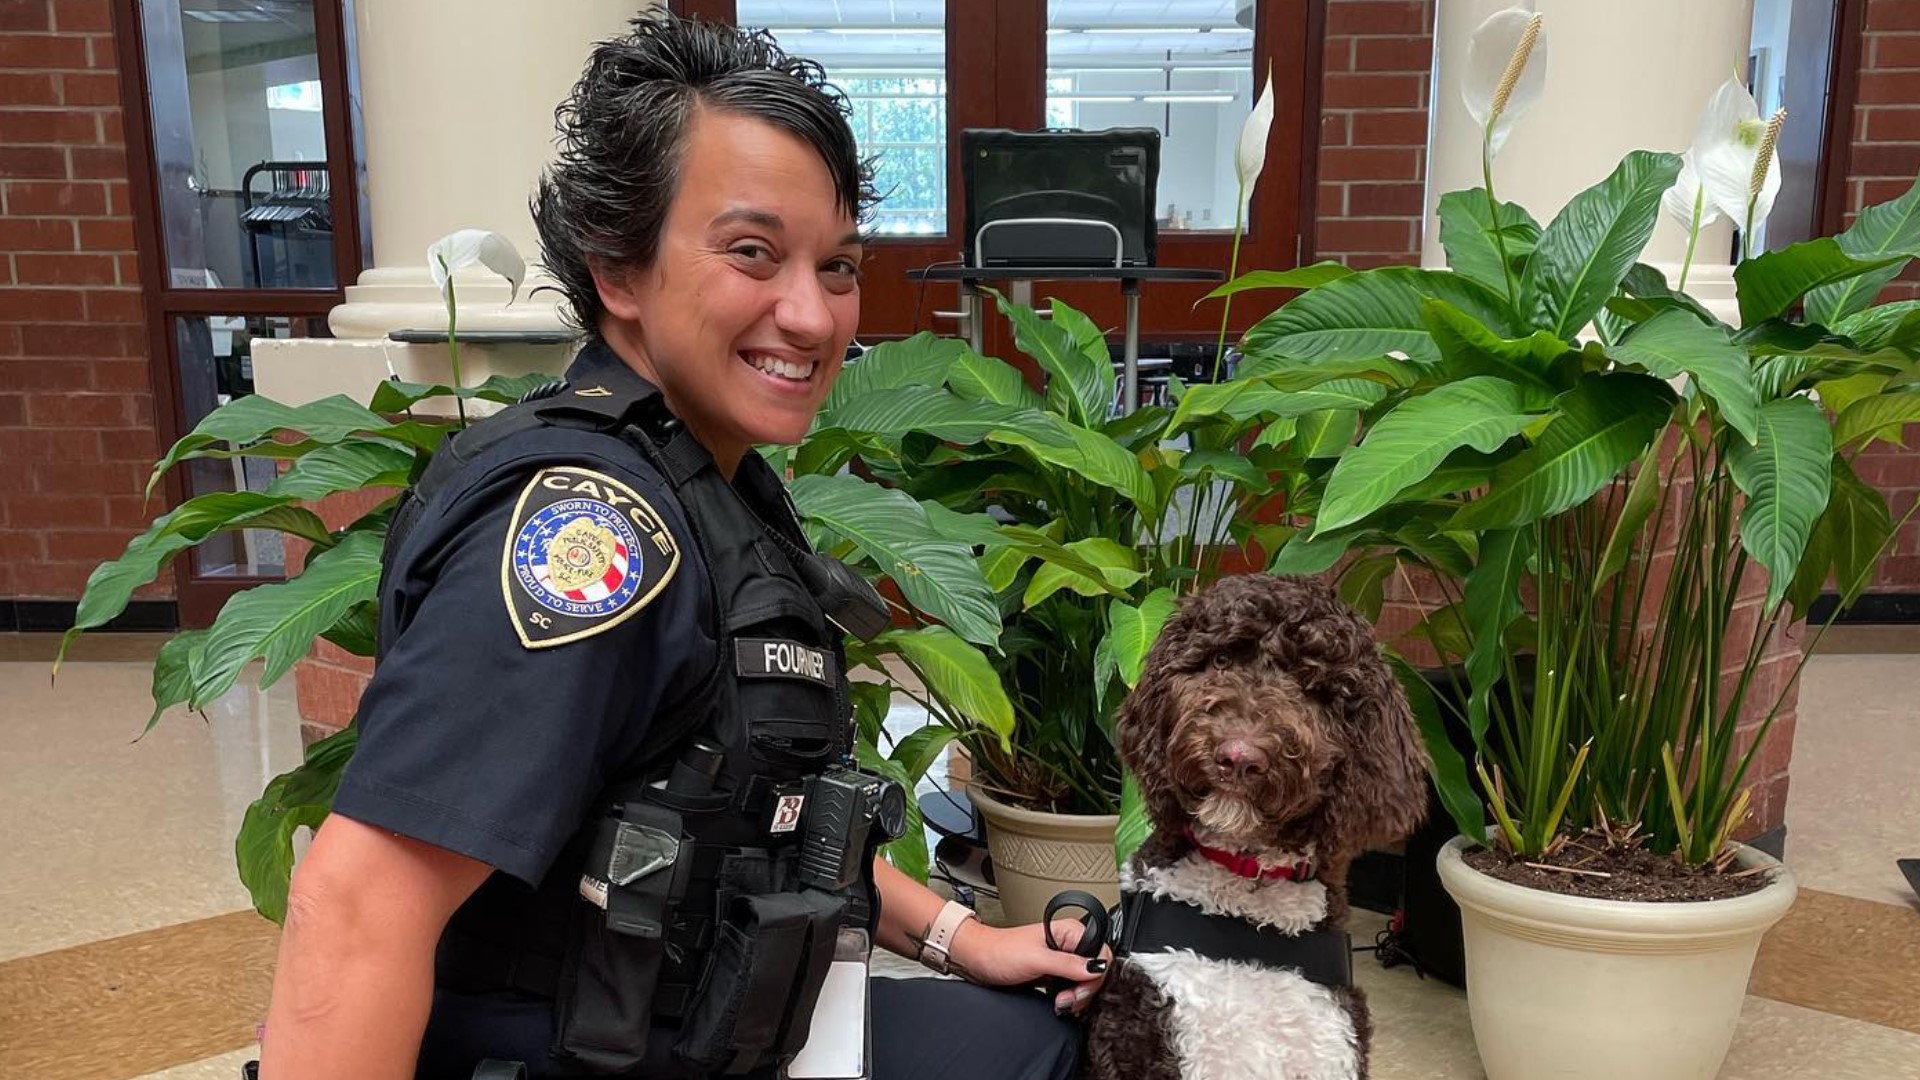 Meet Hudson! He's a fluffy, friendly golden-doodle who helps the community of Cayce in a big way.